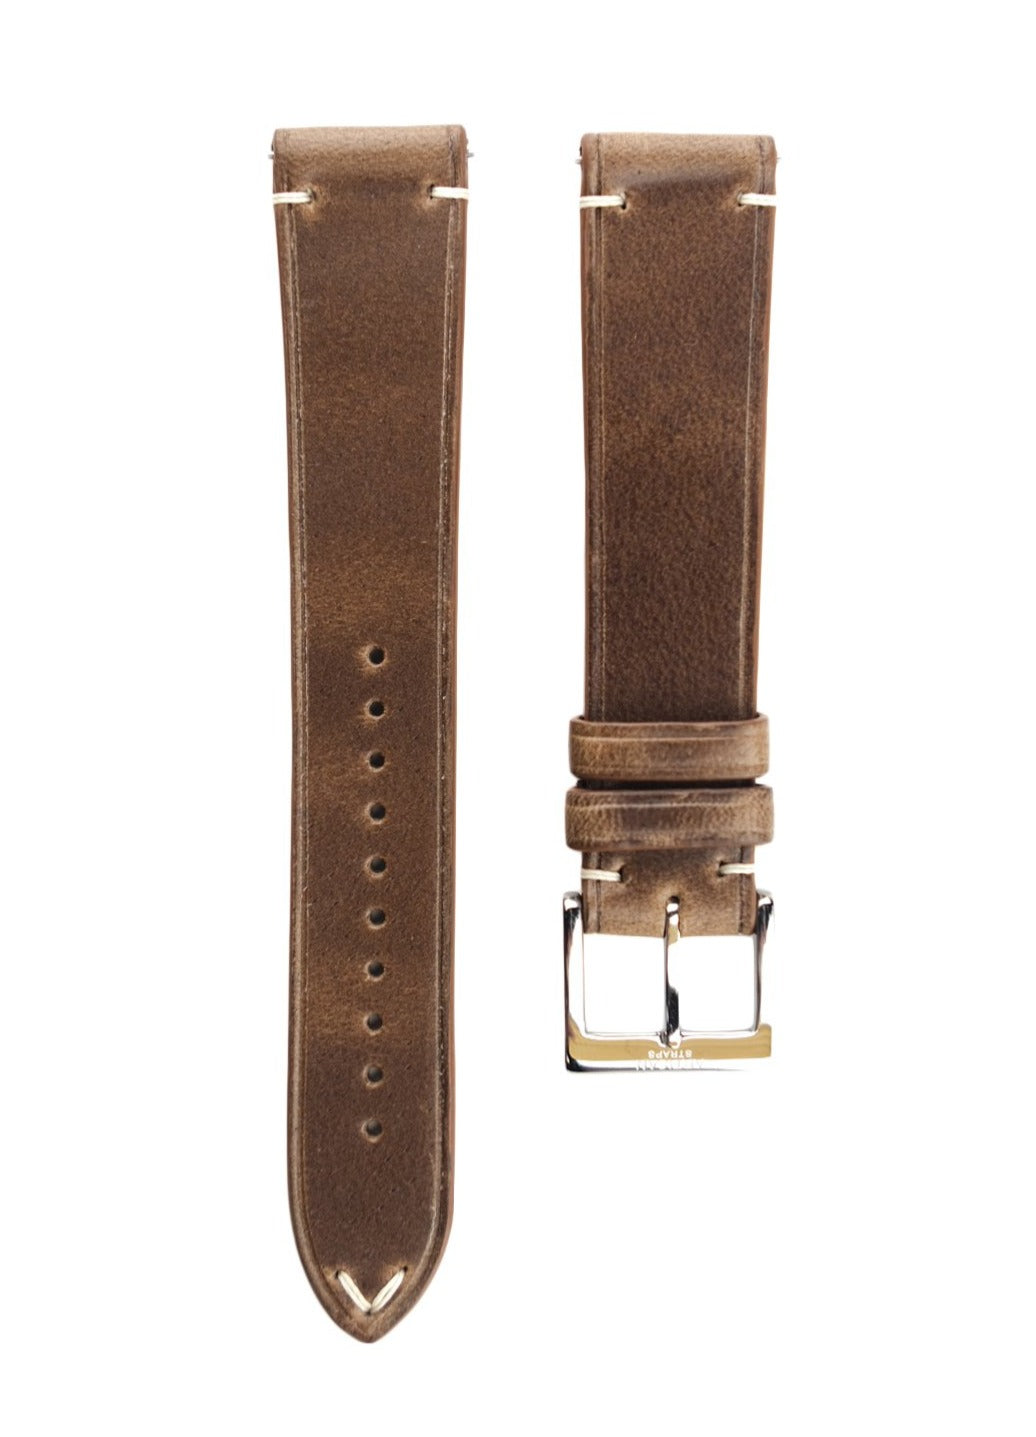 Horween Chromexcel Two-Stitch Calf Leather Watch Strap in Natural - Artisan Straps